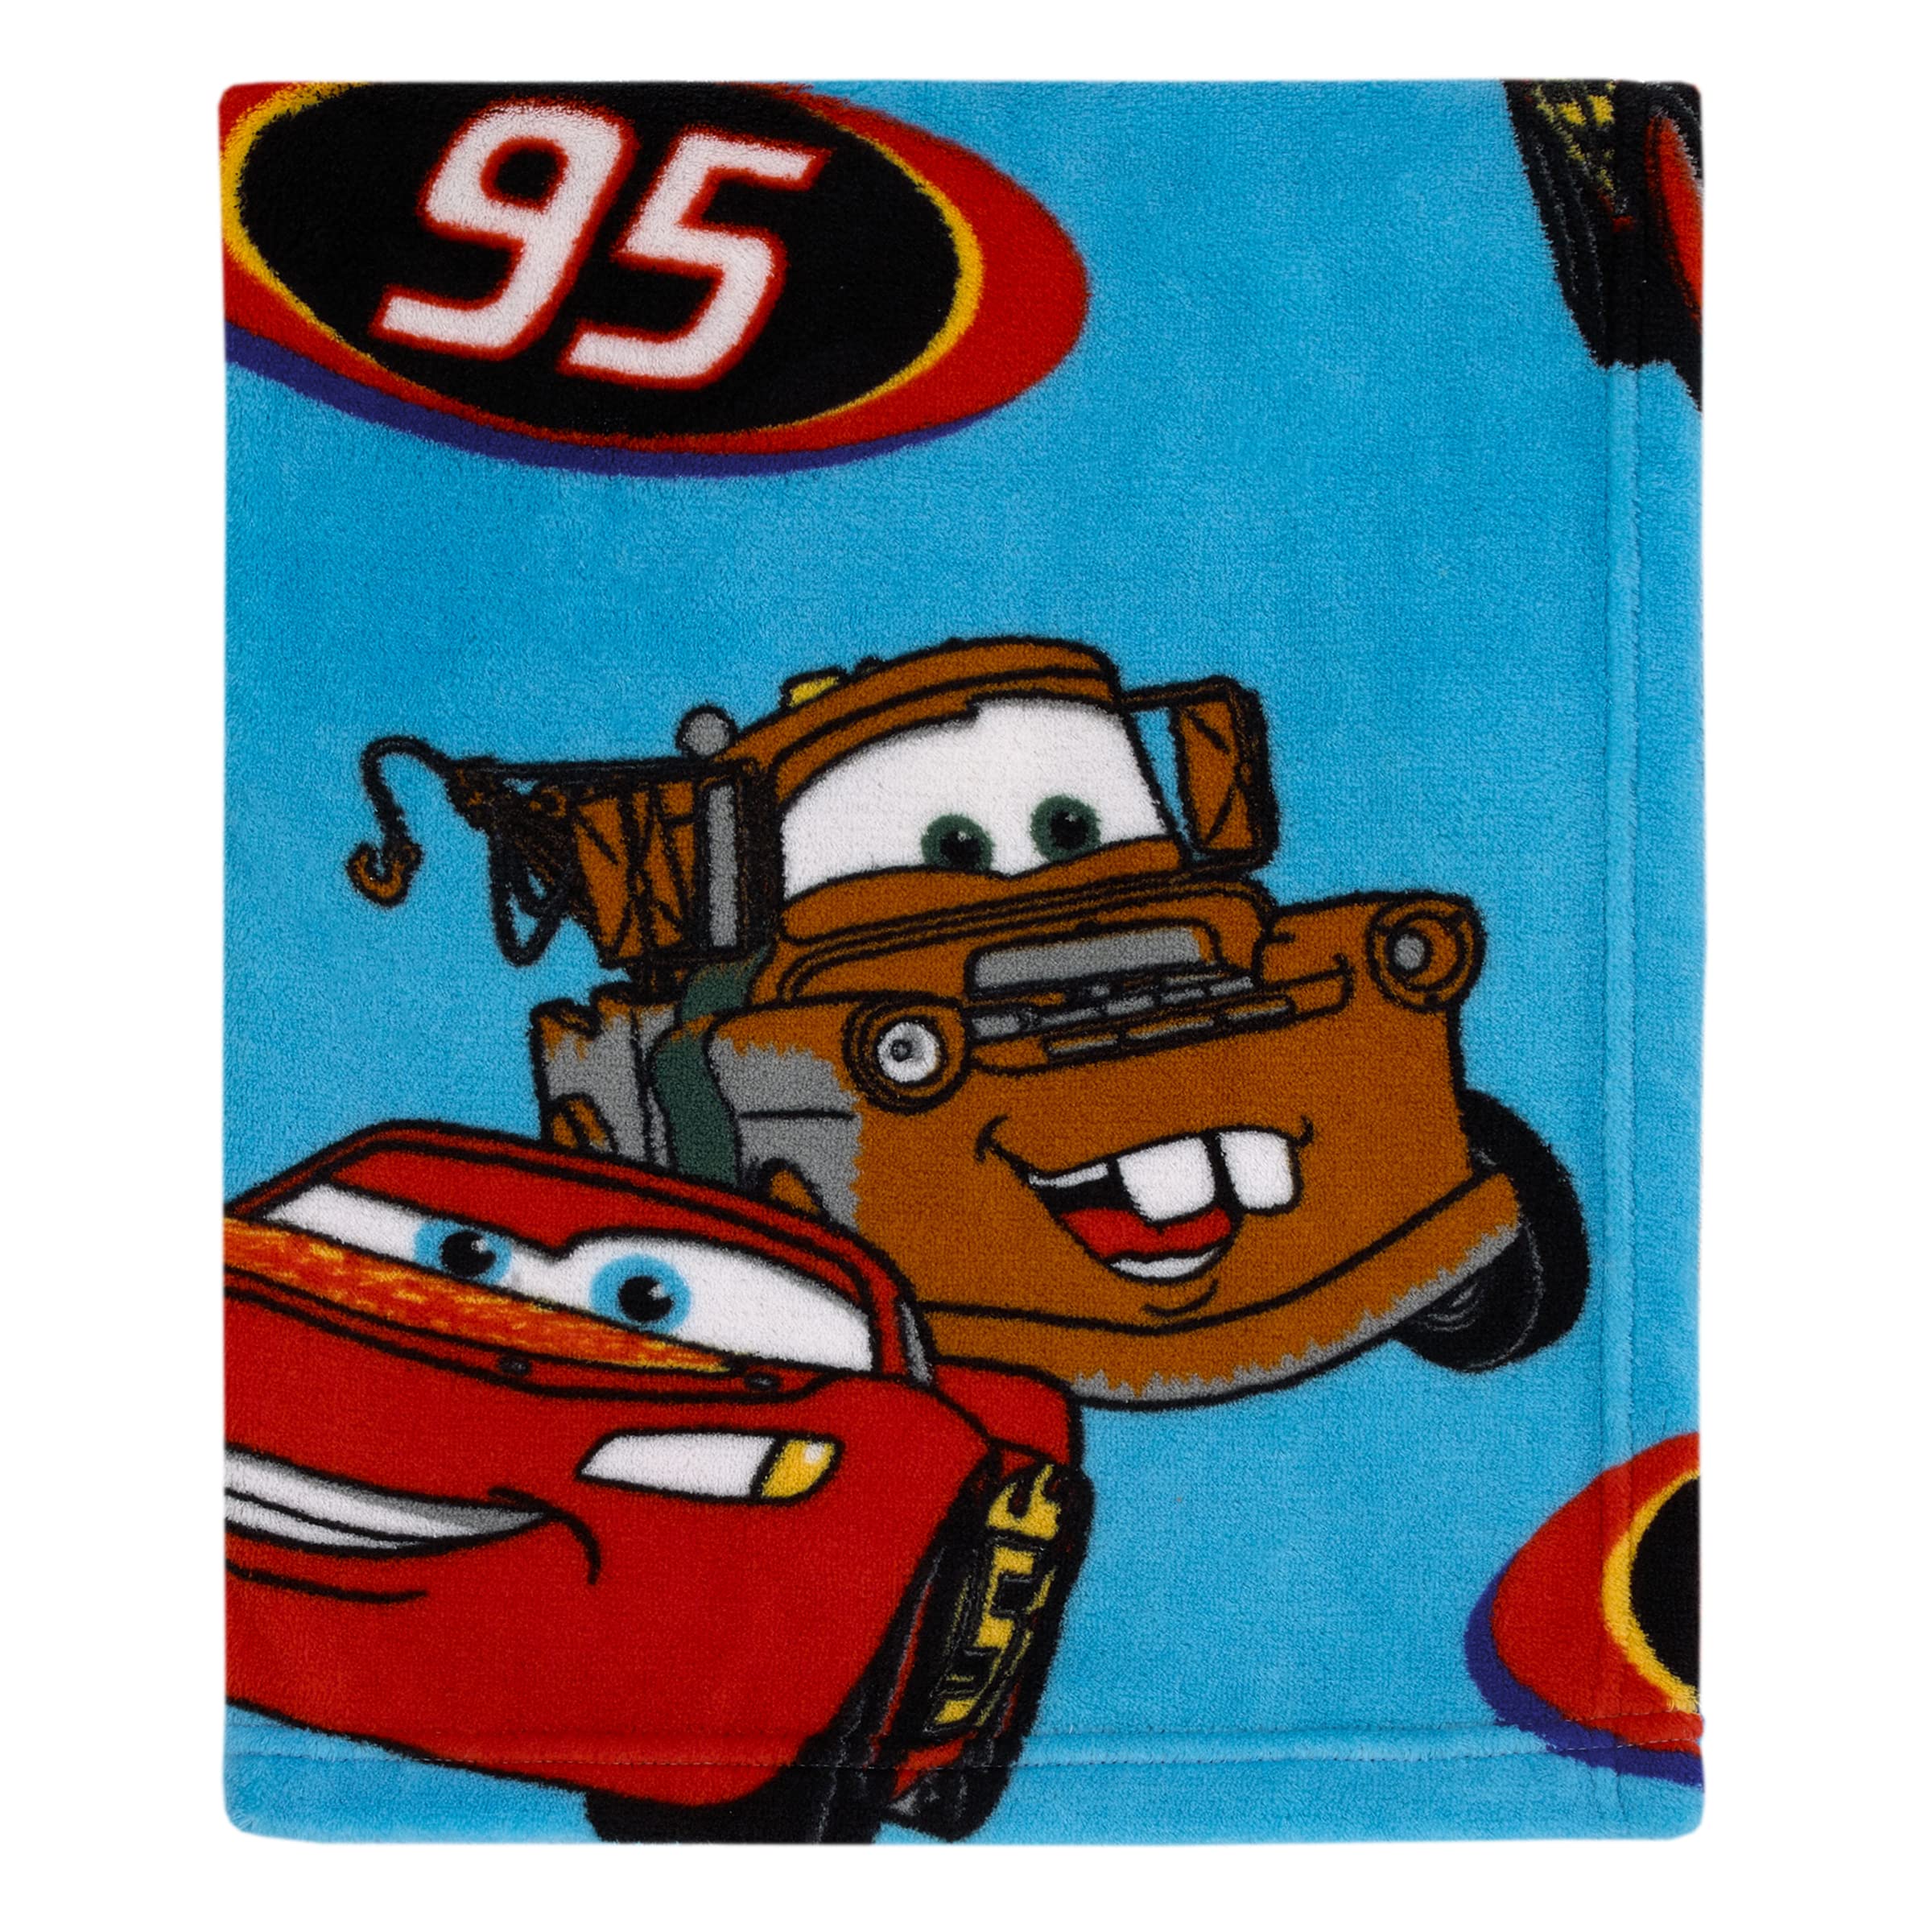 Disney Cars Radiator Springs Blue and Red Lightning McQueen and Tow-Mater Super Soft Toddler Blanket